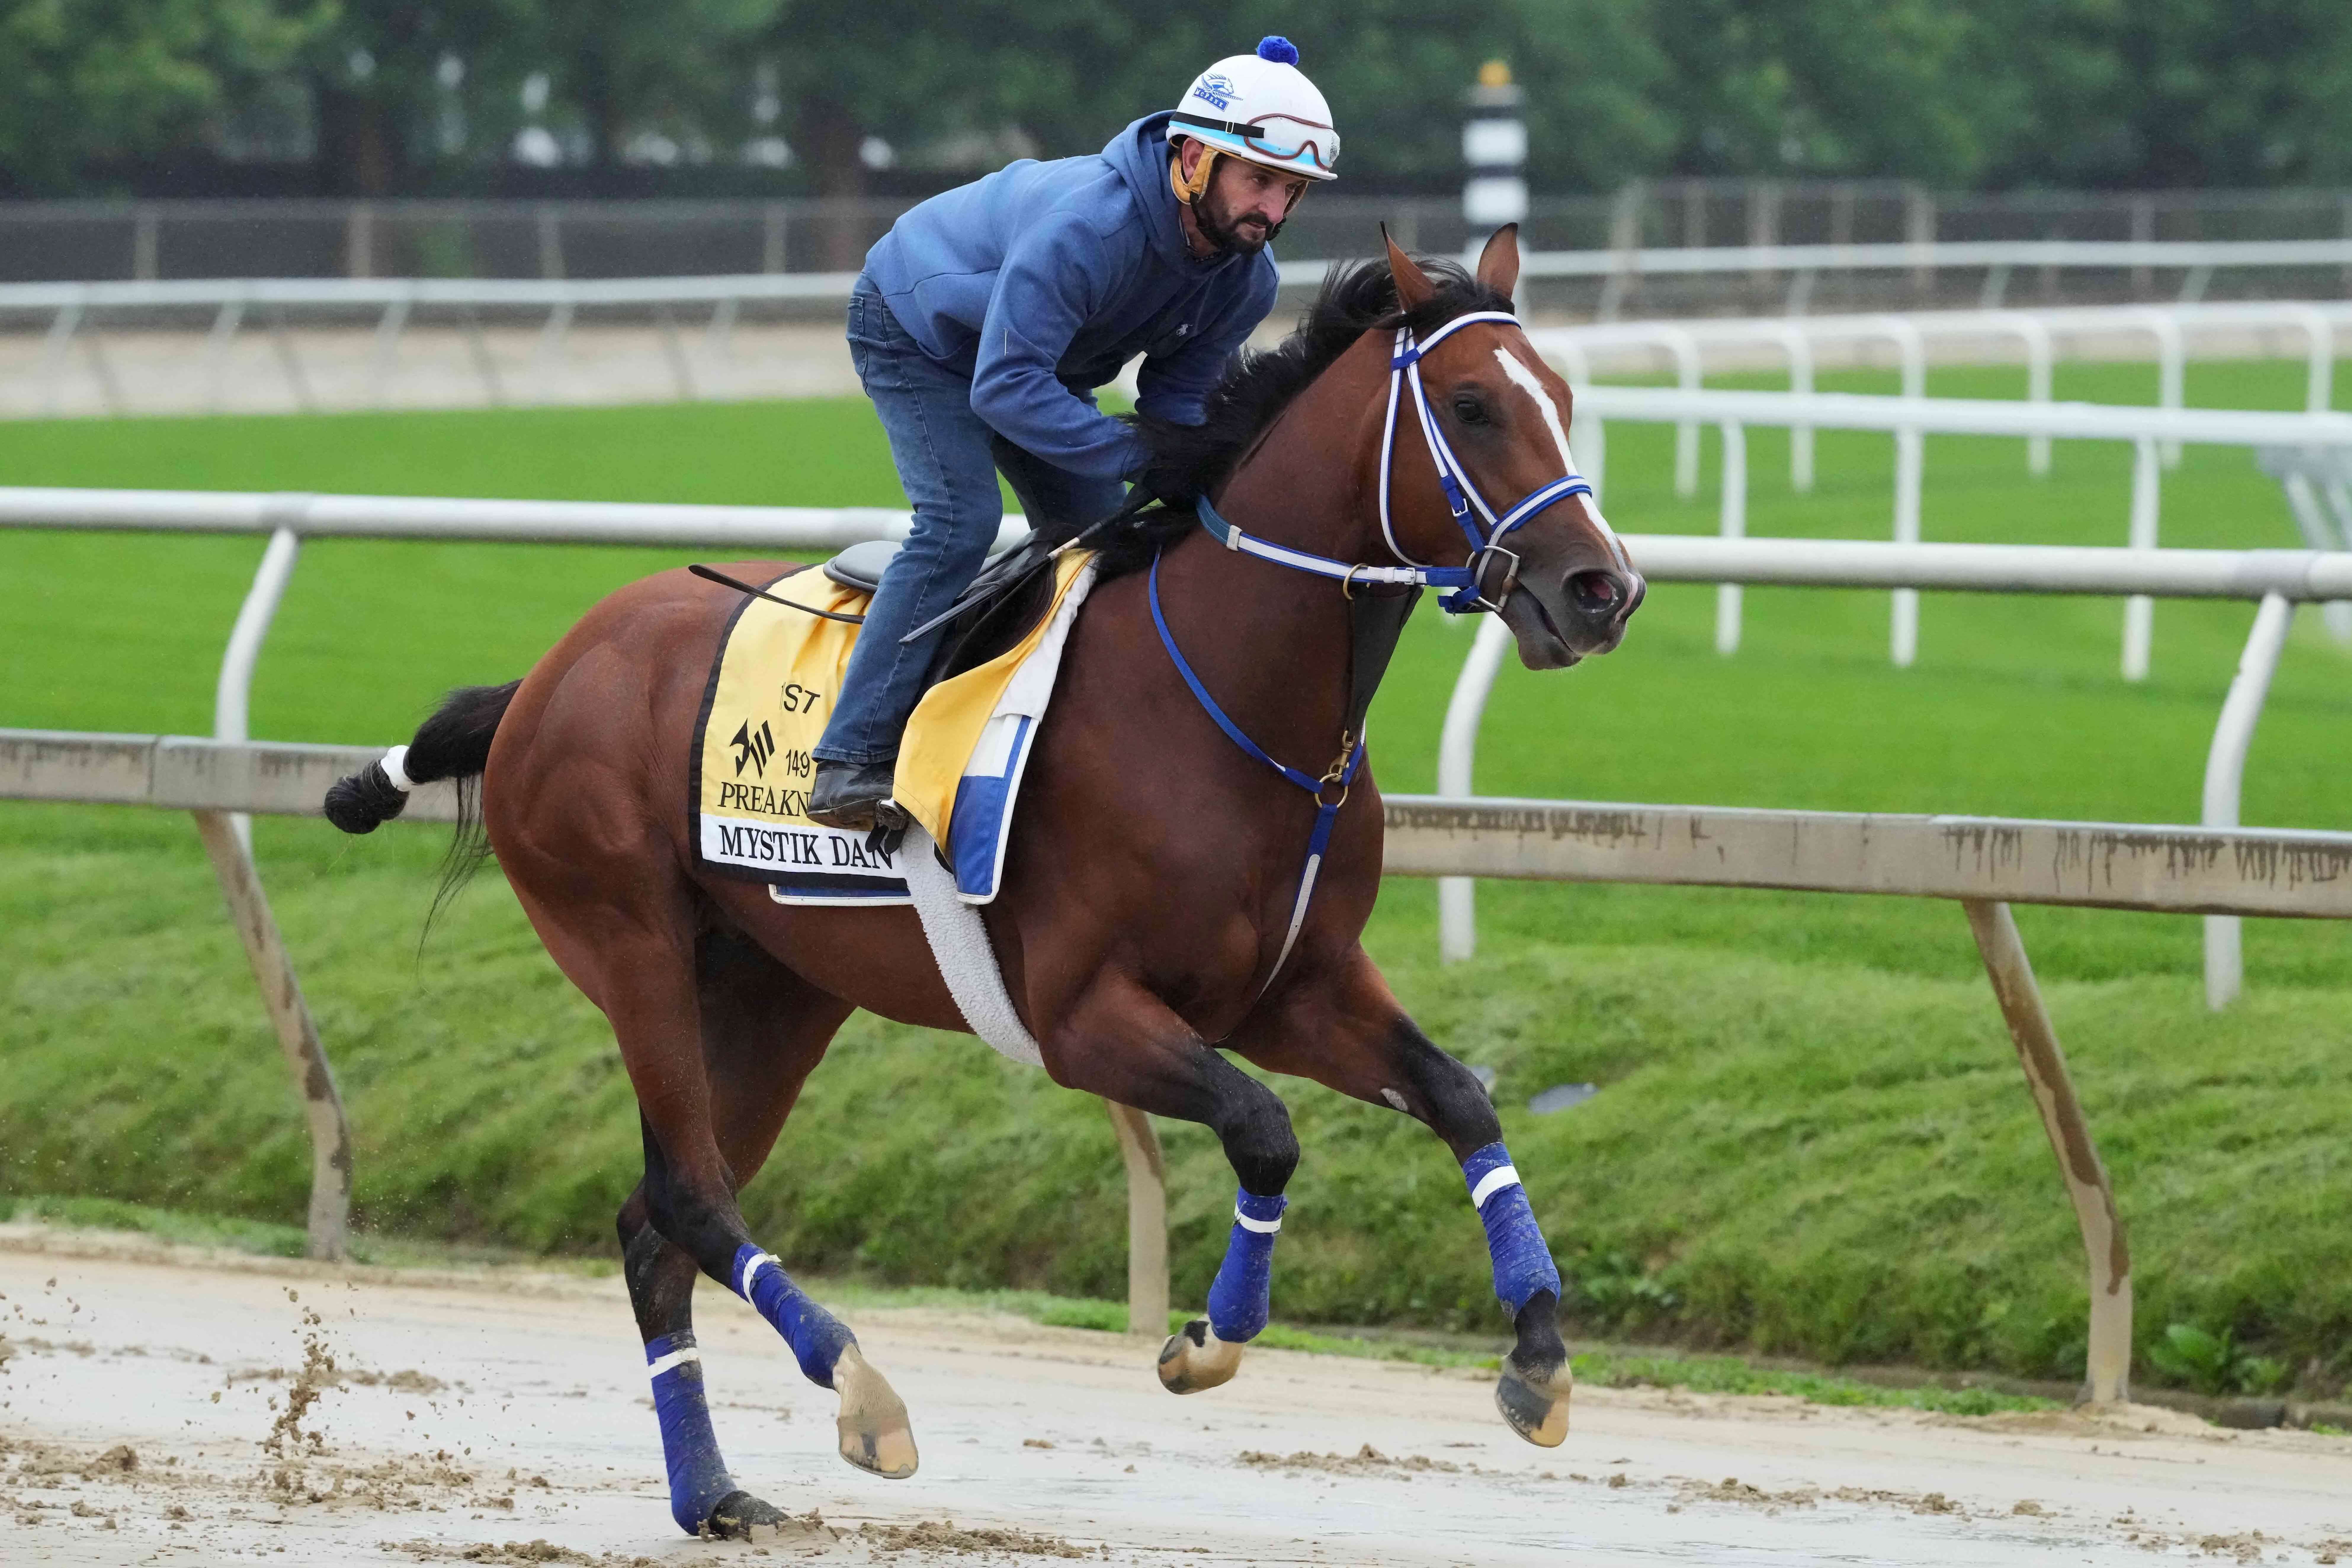 How To Bet - Preakness Odds: Friday Favorites Feature Mystik Dan, Catching Freedom